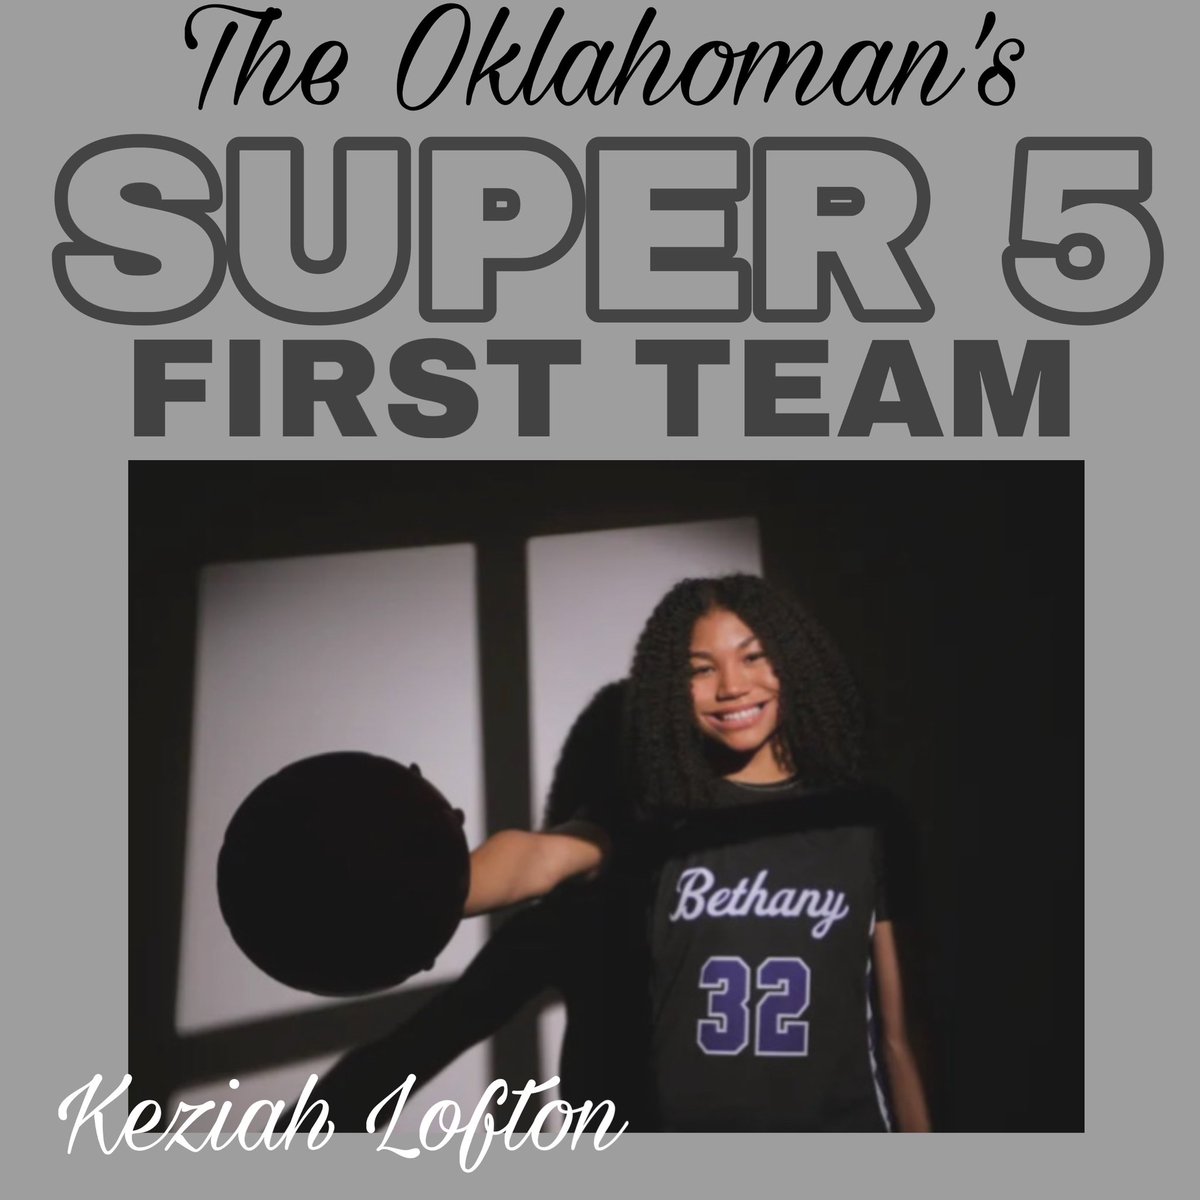 Thank you @halliehart and @TheOklahoman_ for selecting me for Super 5. It’s an honor to be selected again and a big congratulations to all named. 🤍